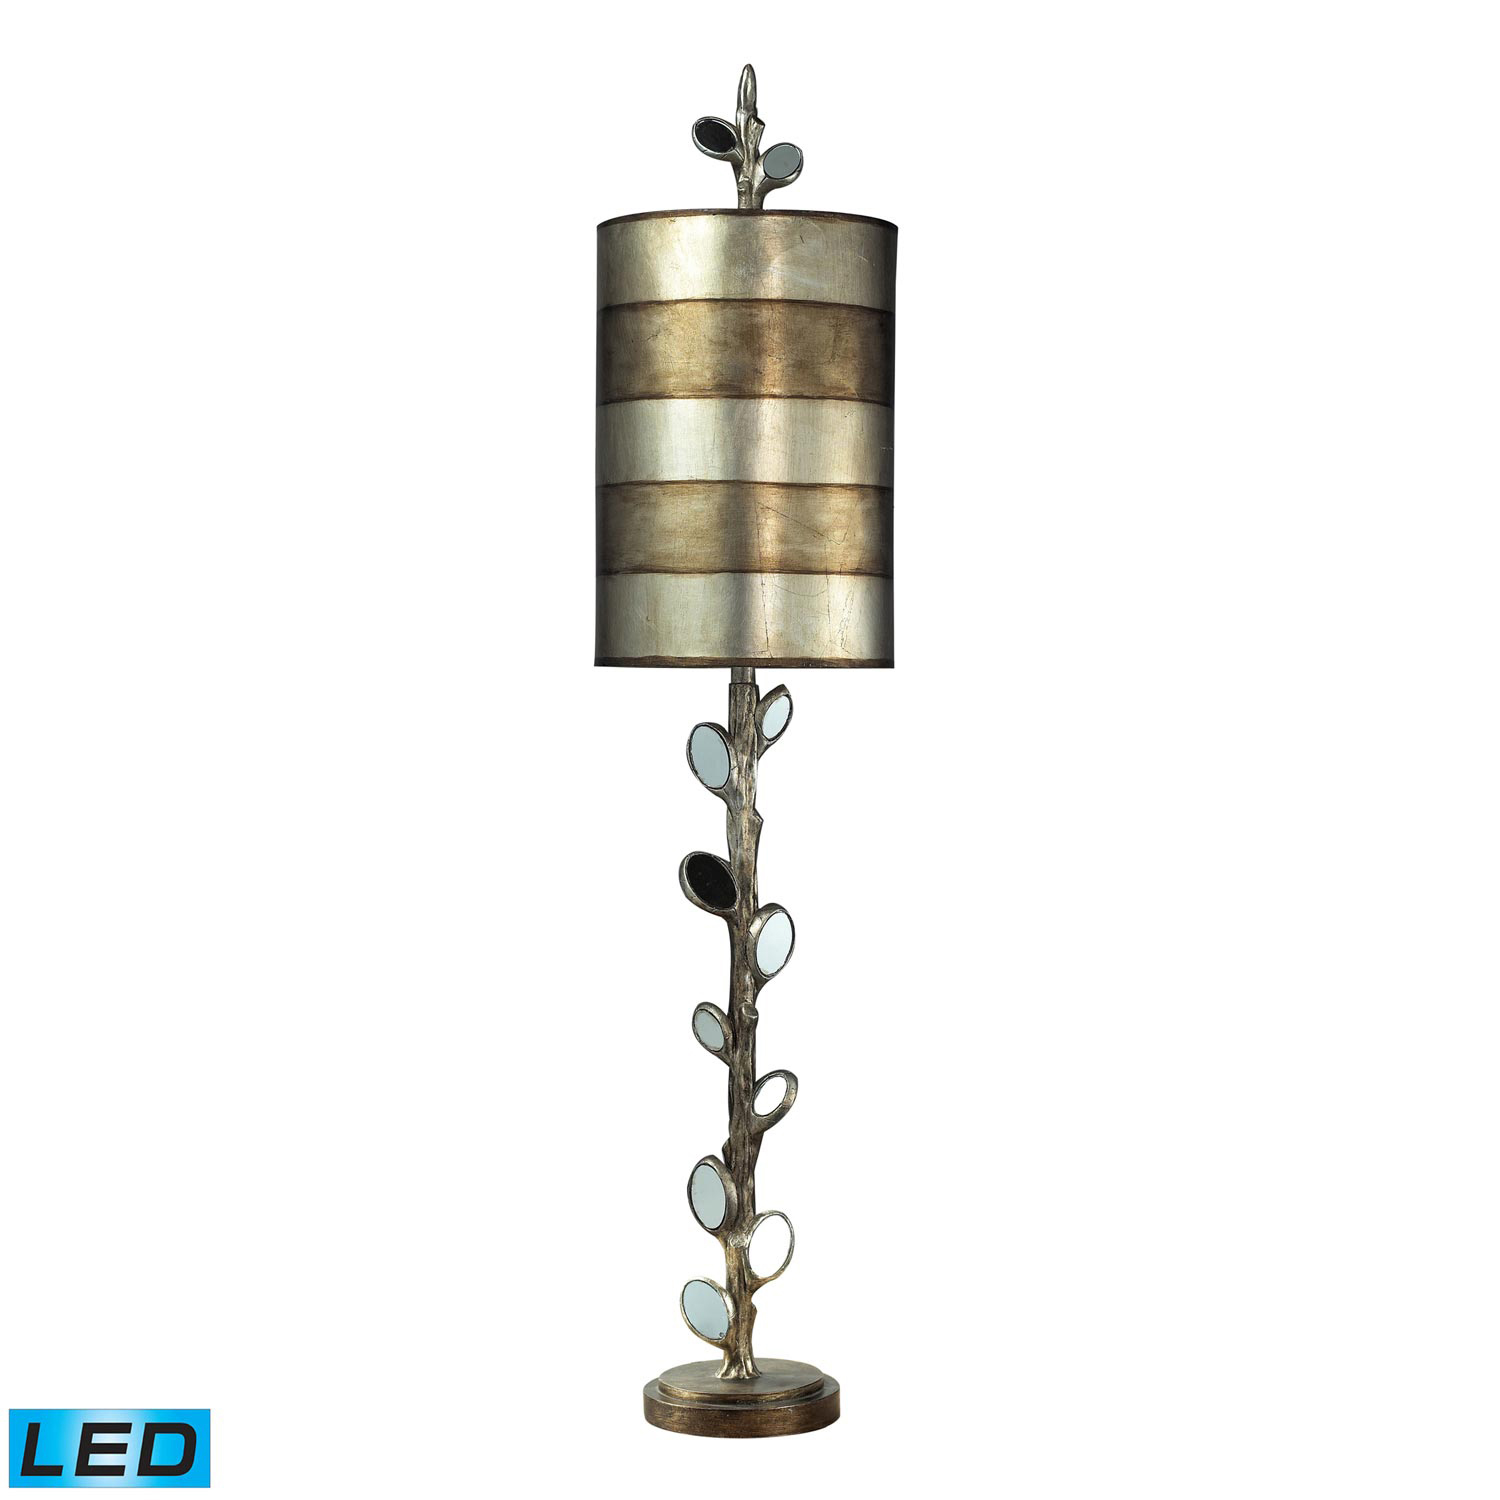 Elk Lighting 93-9111-LED Amherst Table Lamp - Mirror and Antique Silver